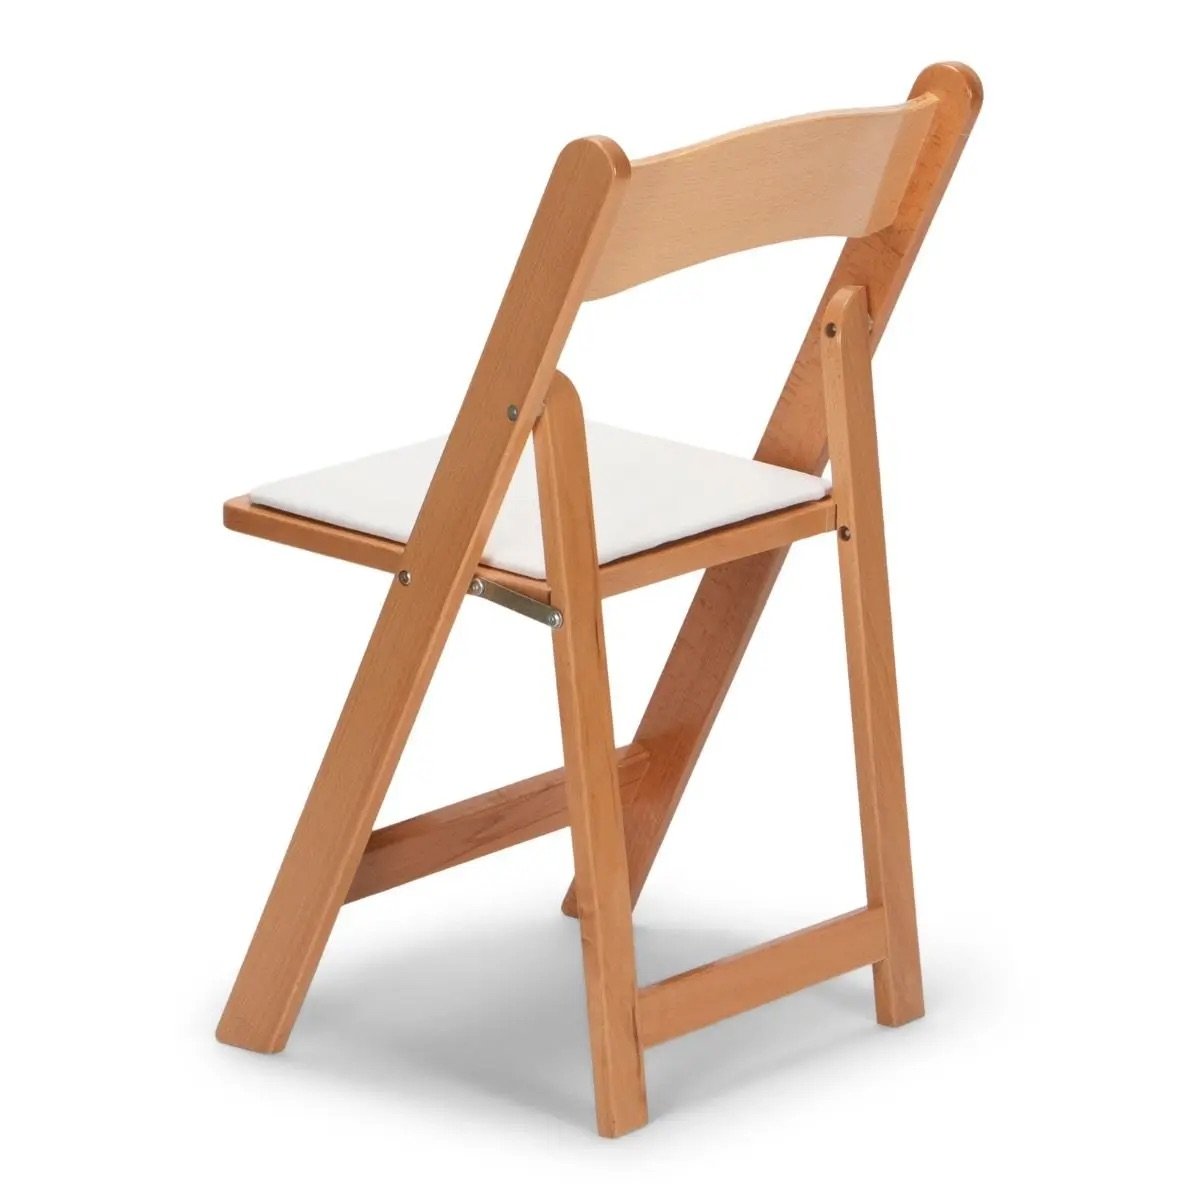 natural-wood-folding-chair-with-white-seat-hughes-event-rentals-charleston-sc4.jpeg